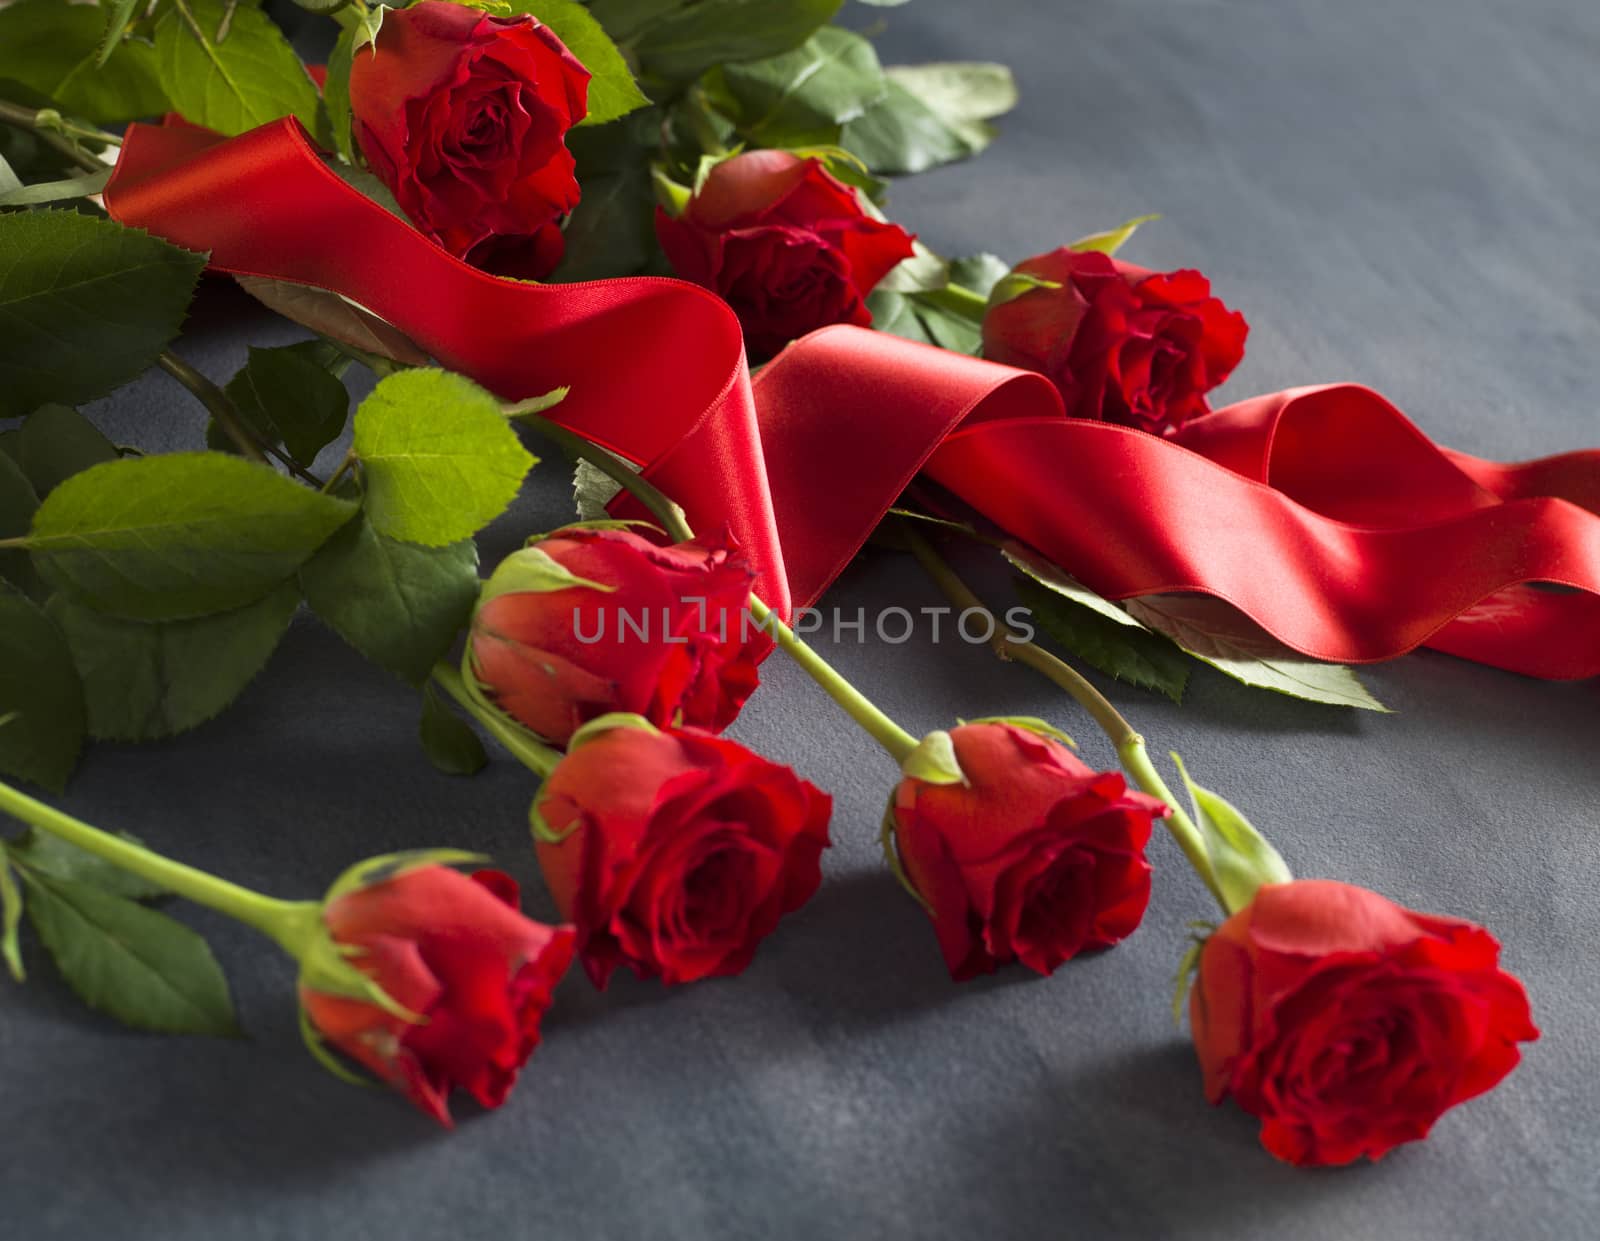 Grey stone with a bunch of red roses by janssenkruseproductions